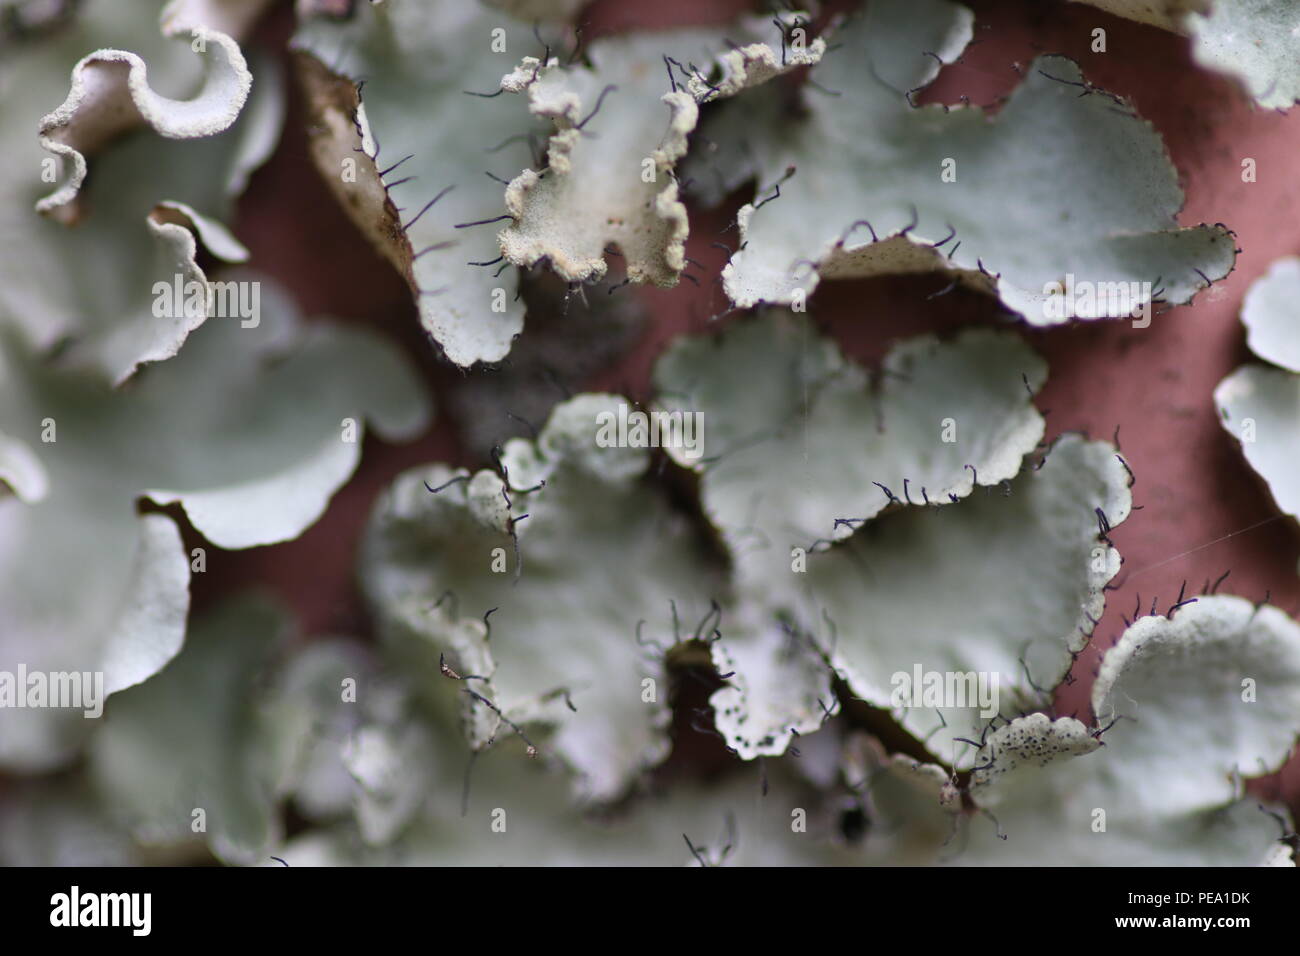 Macro shot of lichen on a red metal fence Stock Photo